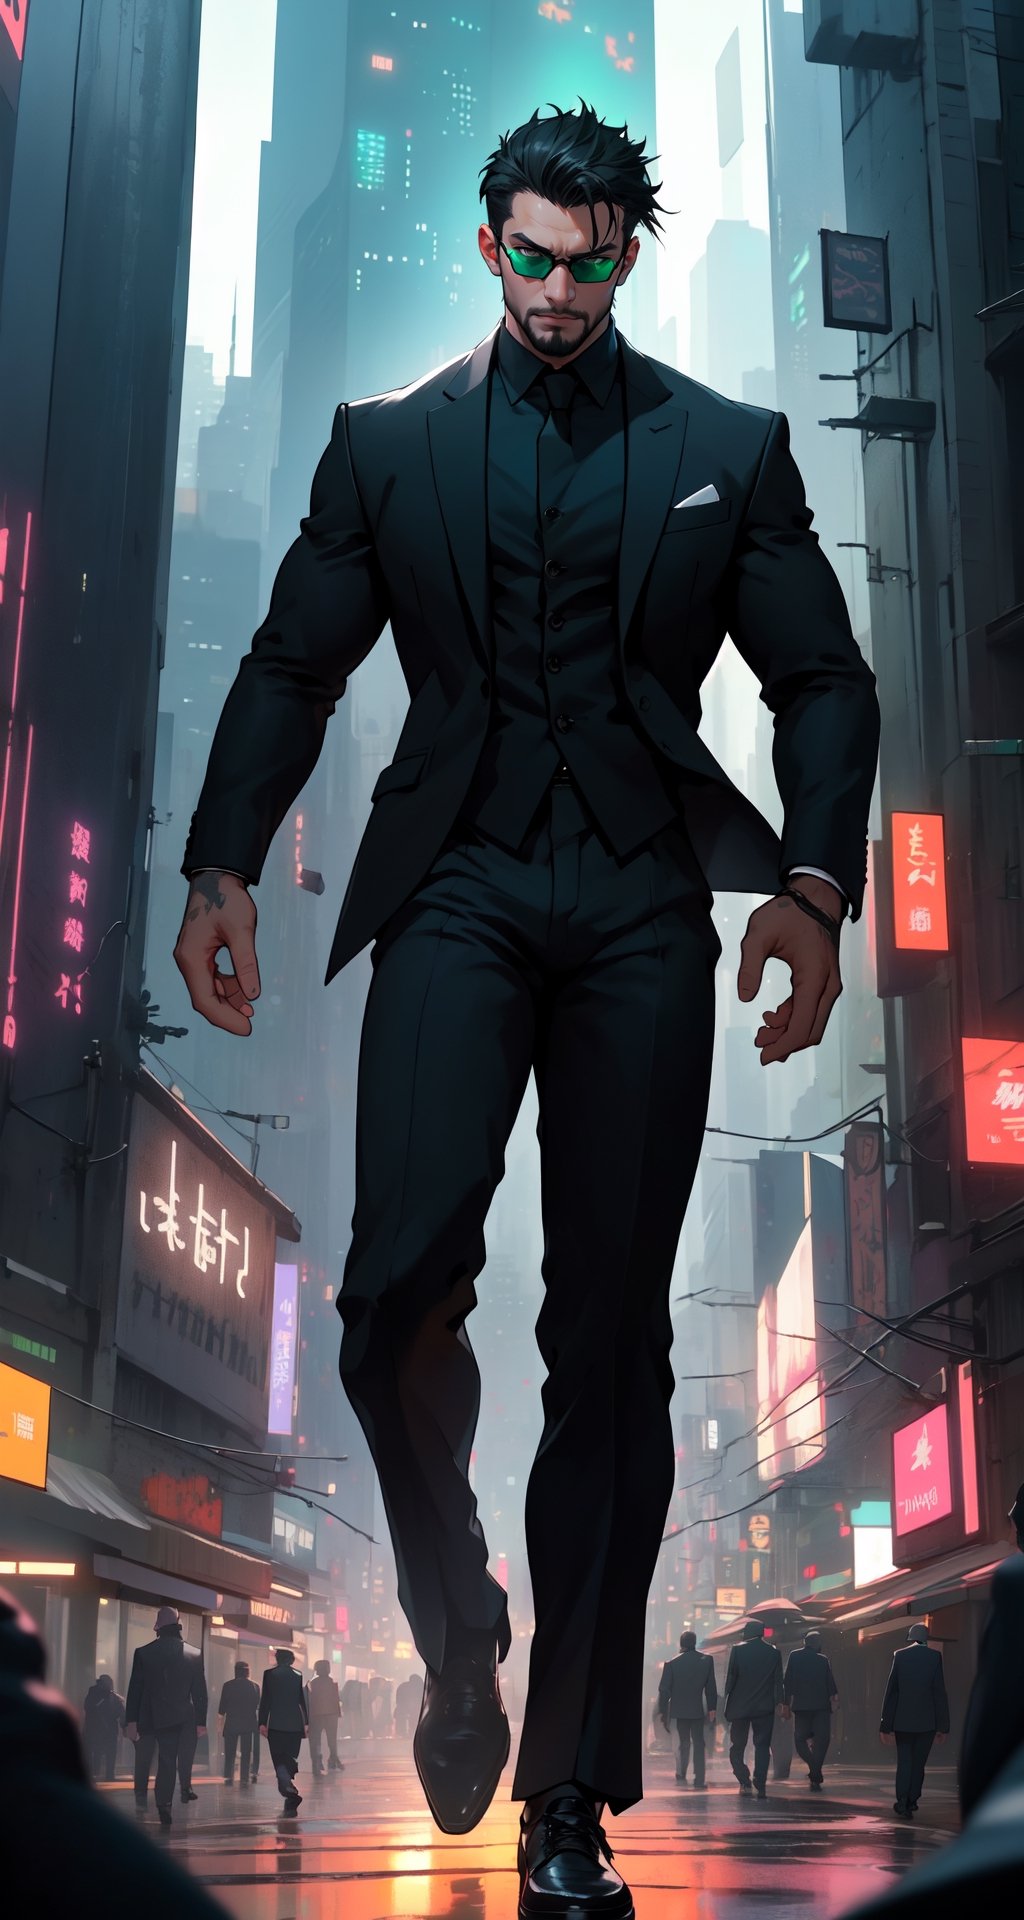 Master masterpiece, high-definition picture quality, matrix style, Matrix, ((1matureman)), the correct body proportion, black glasses, short-hair, little facial hair, brown_eyes, city, green, all-black suit, dark night, buildings, Code matrix cascading from top to bottom, Cyberpunk